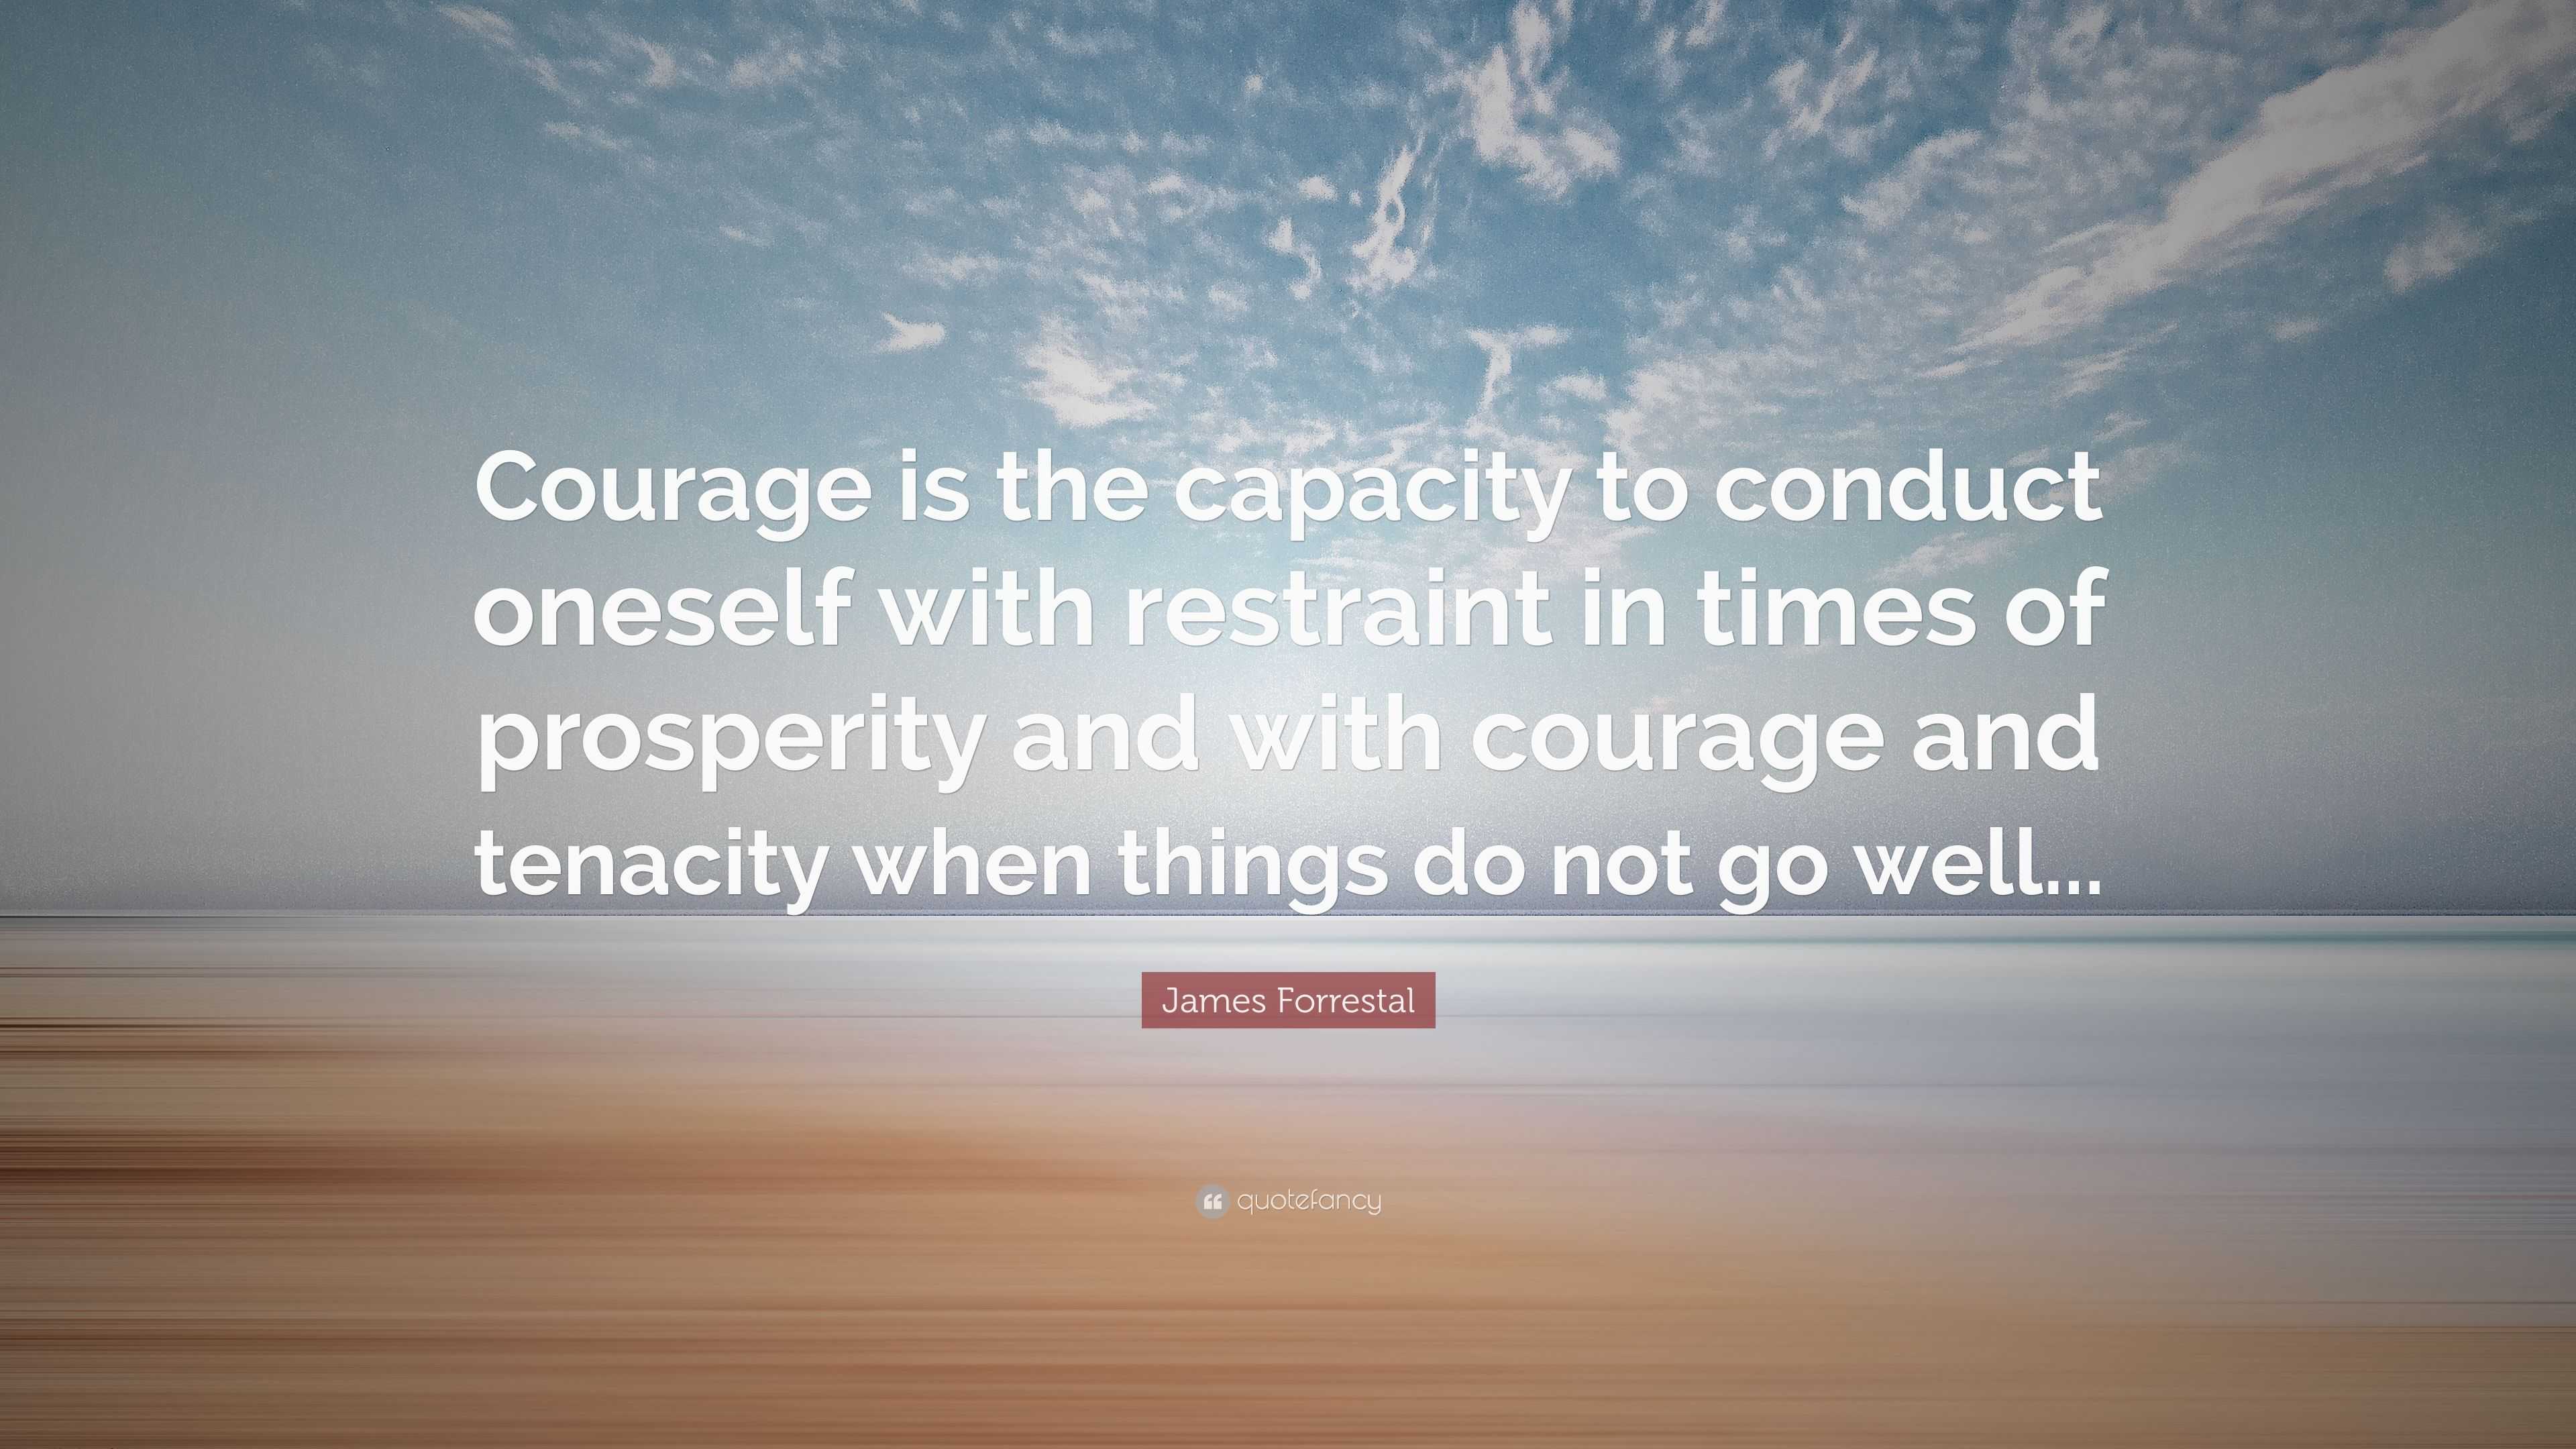 James Forrestal Quote: “Courage is the capacity to conduct oneself with ...